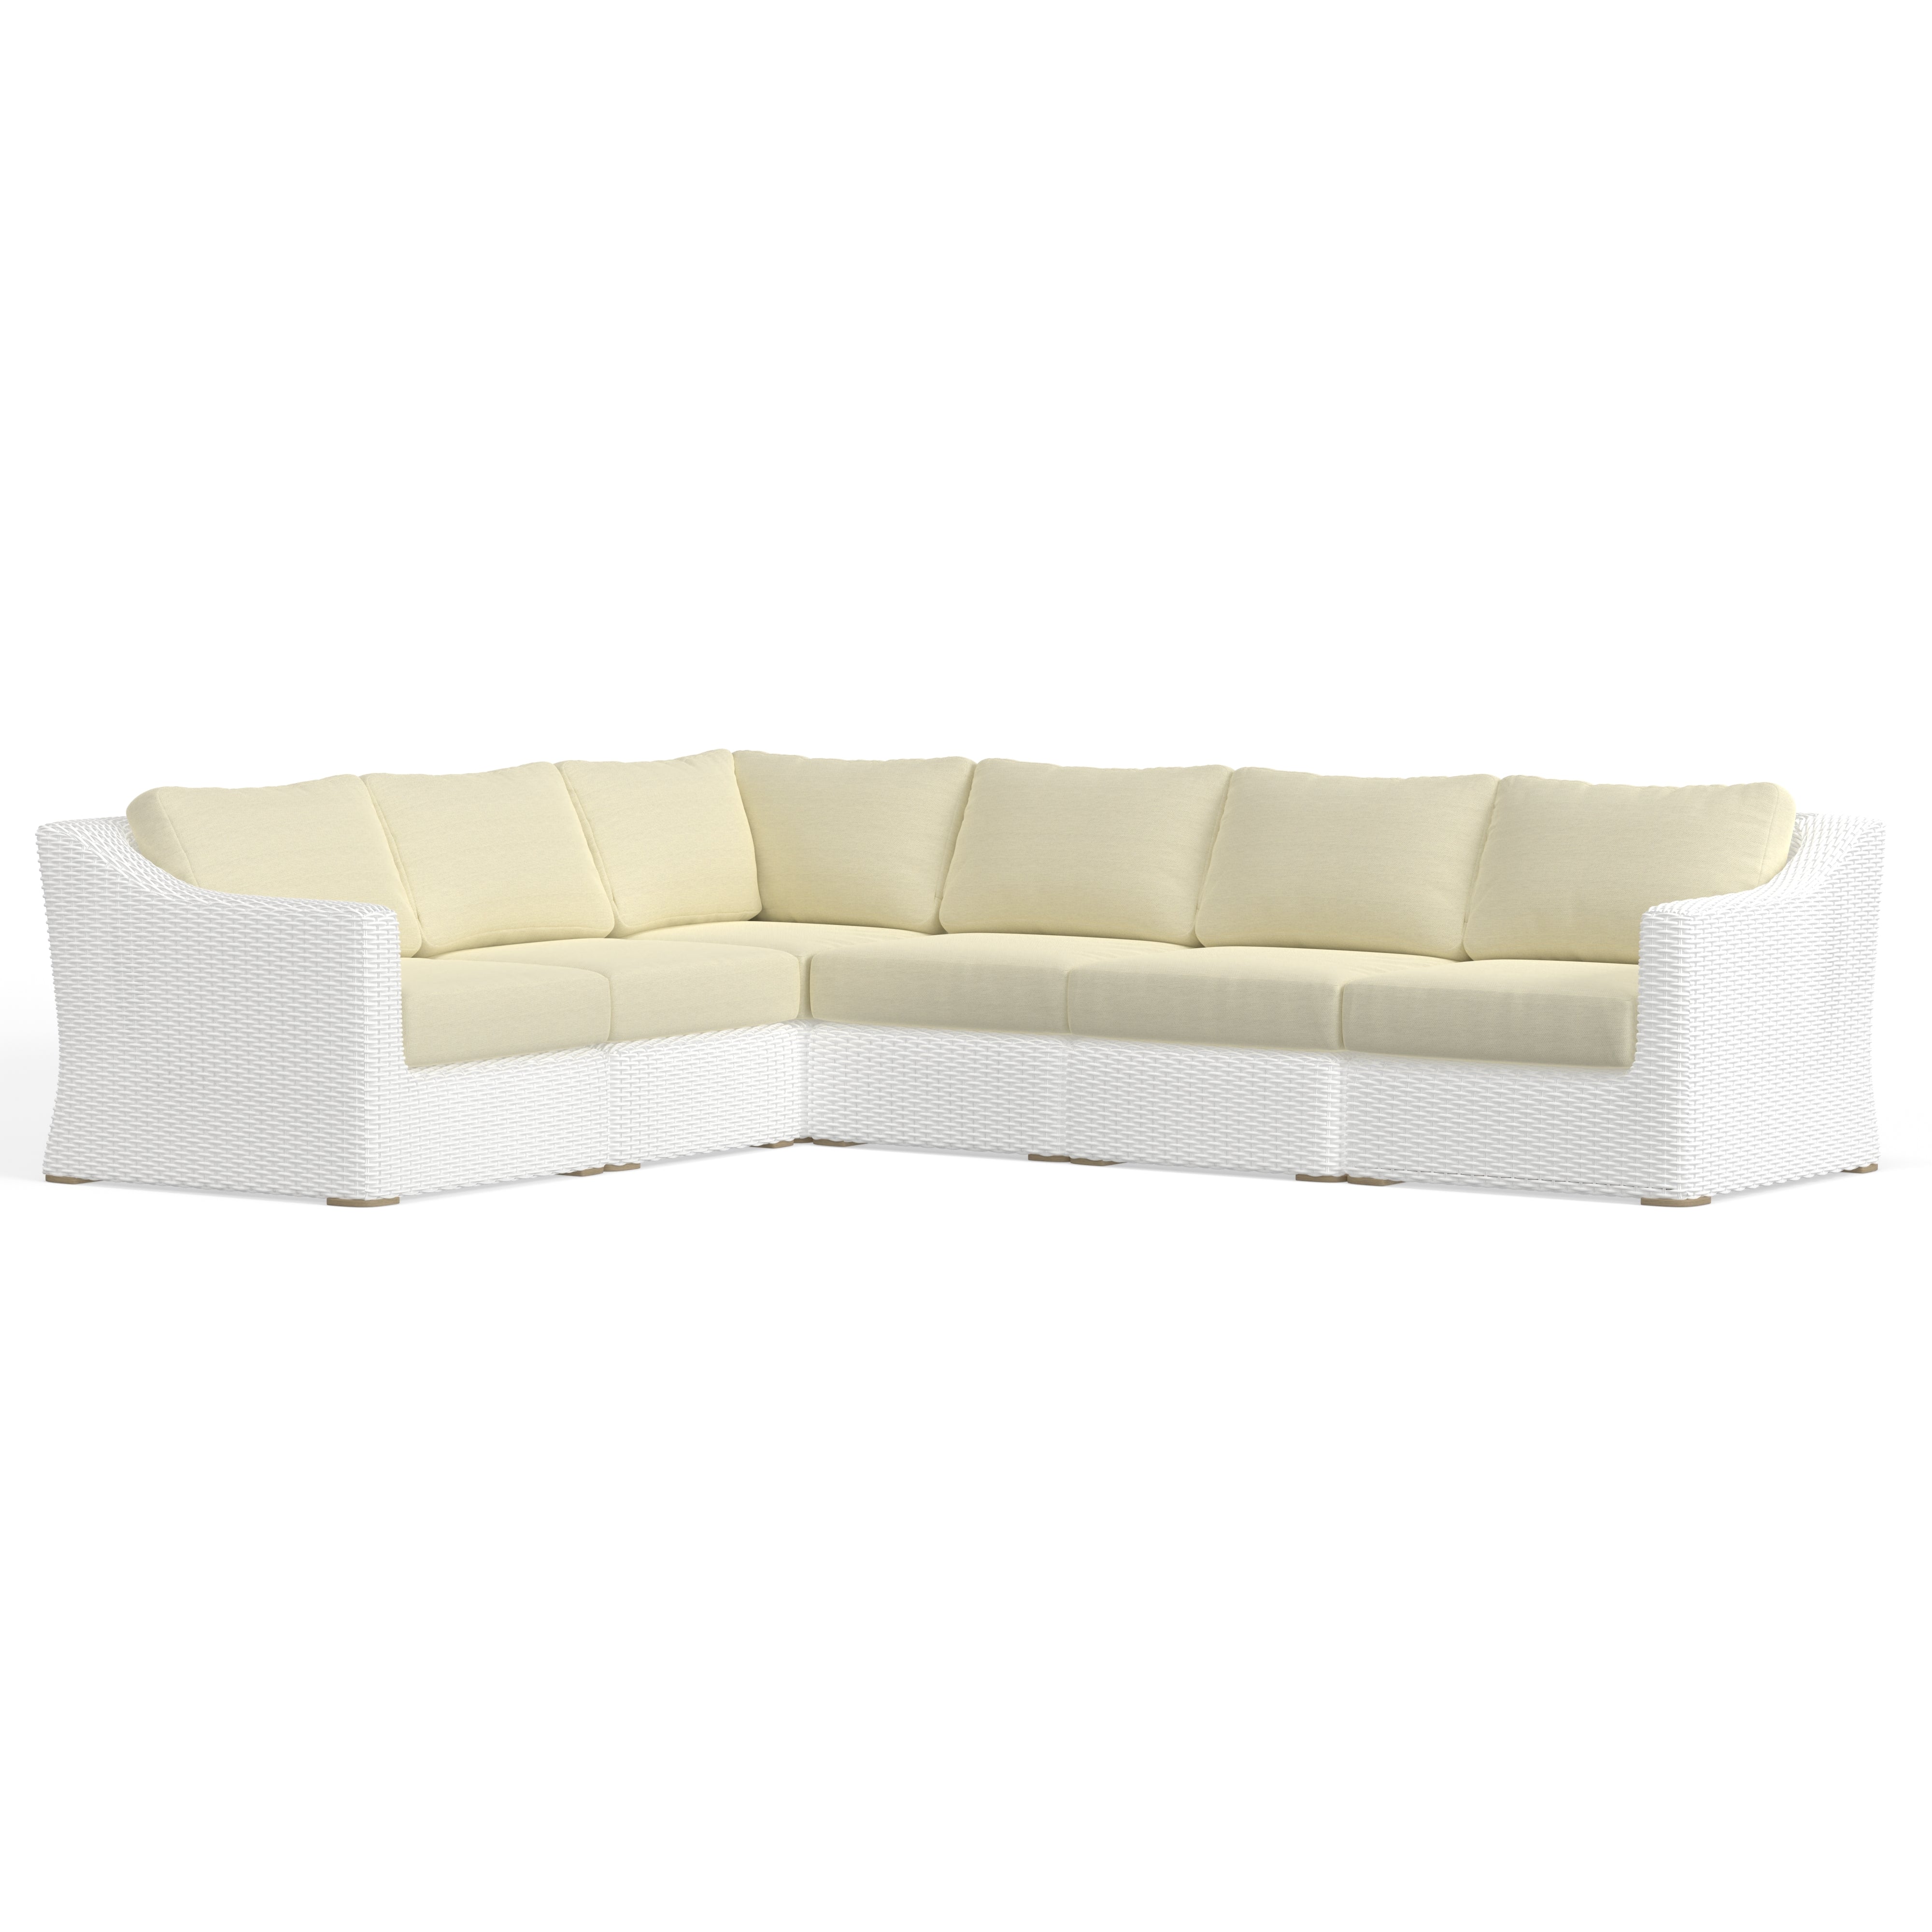 Highest Quality Luxury Outdoor Wicker Sectional Sofa